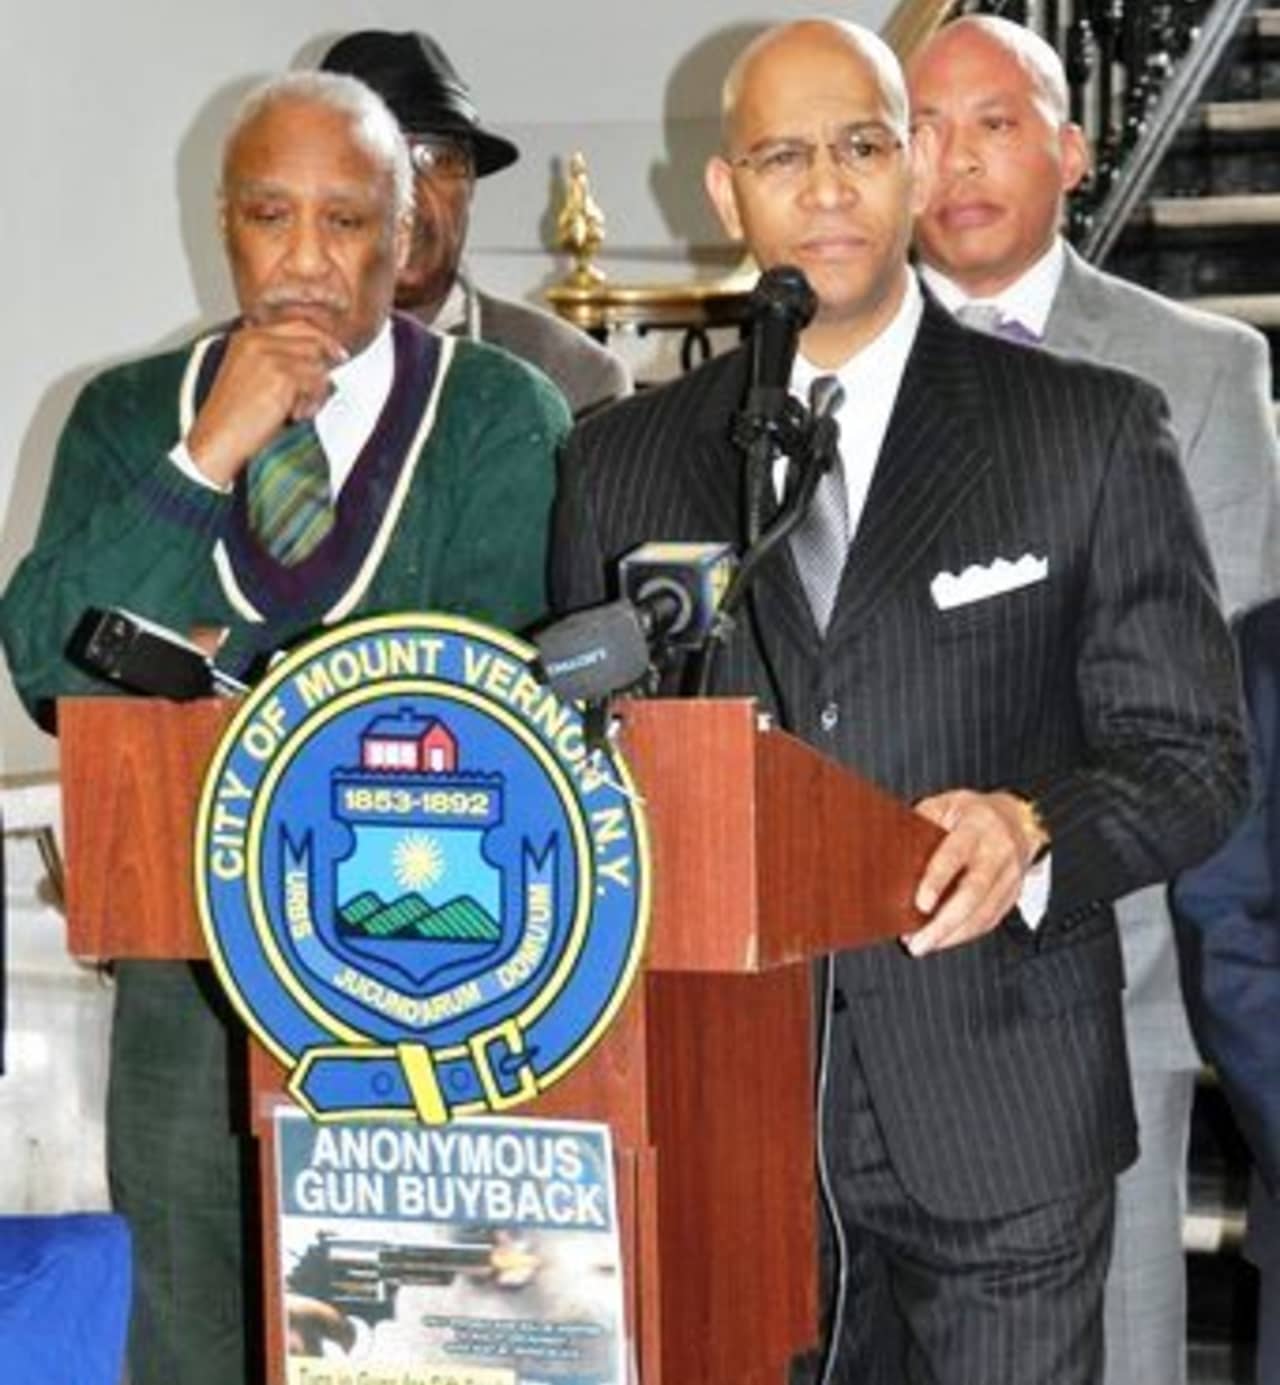 Mount Vernon Mayor Ernie Davis; Westchester County Crime Stoppers Chair Derickson K. Lawrence and Police Commissioner Terrance Raynor announcing the anonymous gun buyback. 
